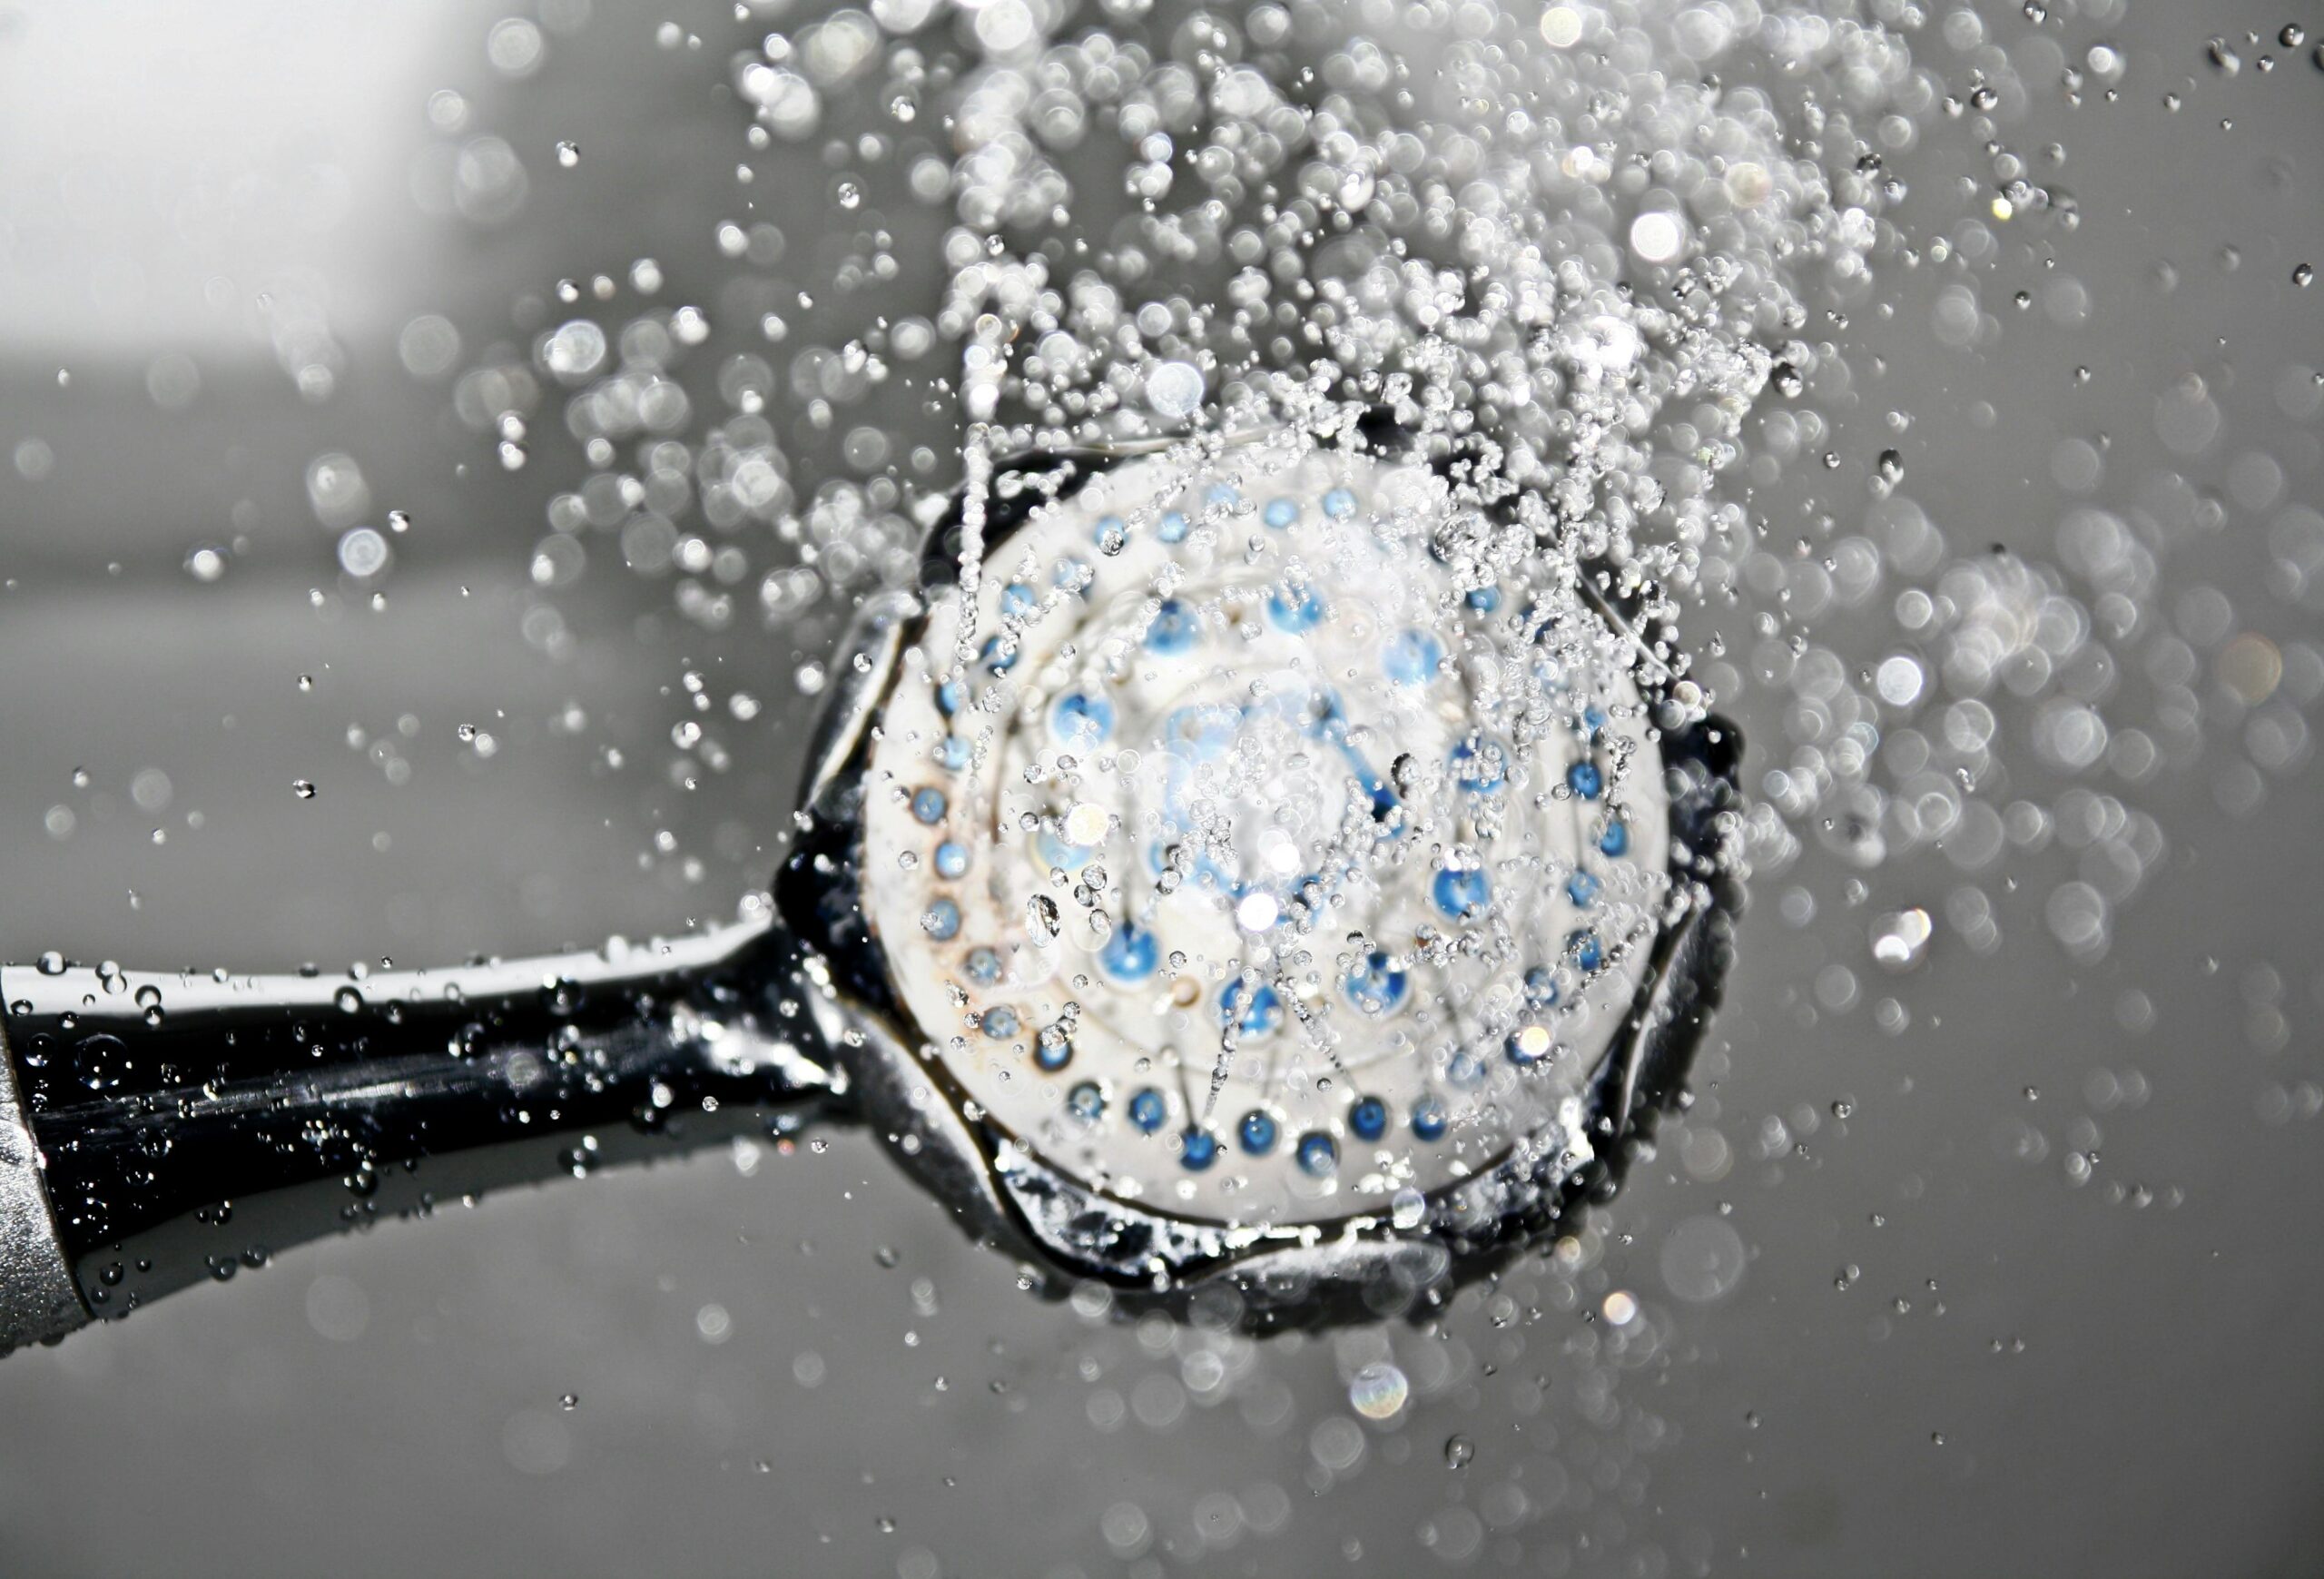 Close up of shower head with spraying water